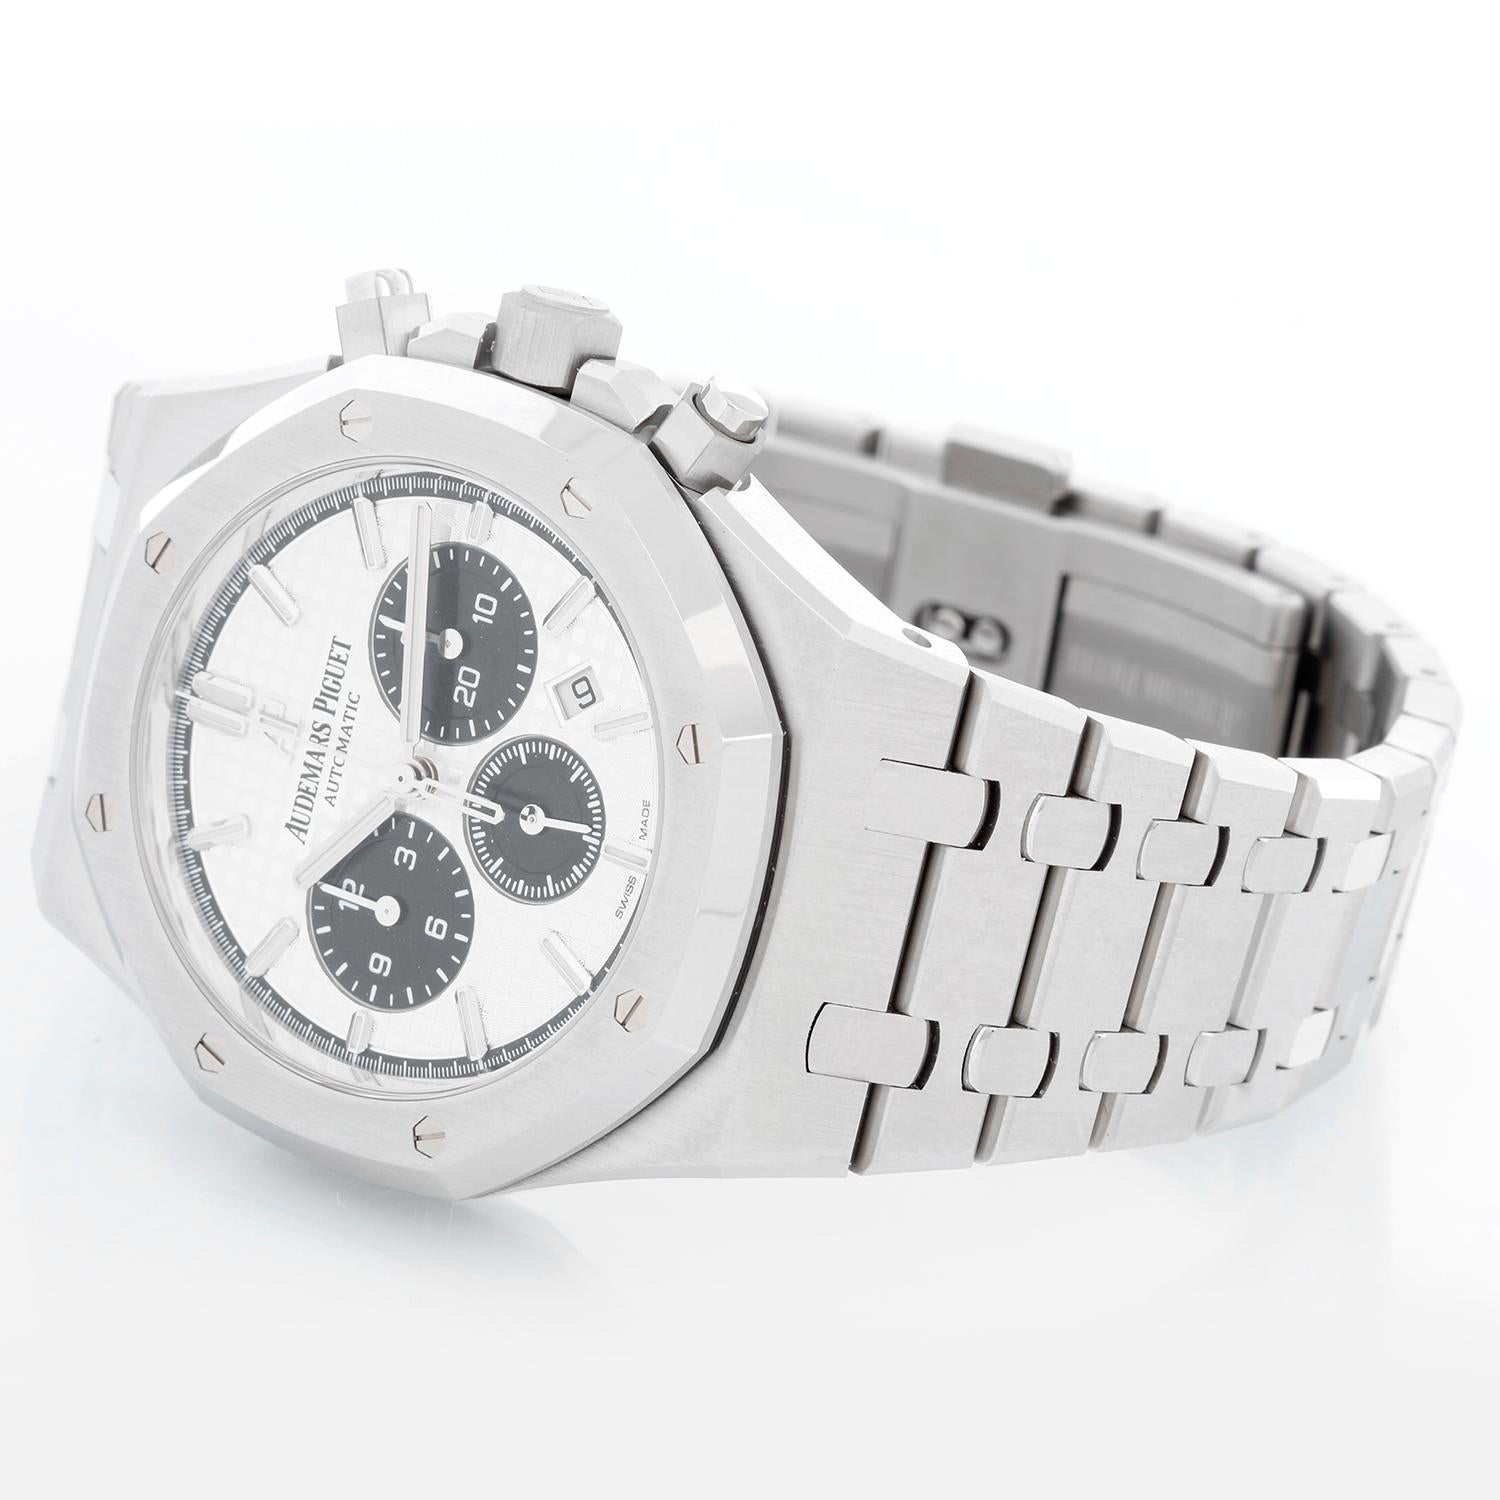 Audemars Piguet Royal Oak Stainless Steel Men's Watch 26331ST.OO.1220ST.03 - Automatic. Stainless Steel. Silver dial with stick hour markers;  Black sub dials; Chronograph. Stainless Steel Audemars Piguet bracelet. Pre-owned with Audemars Piguet box